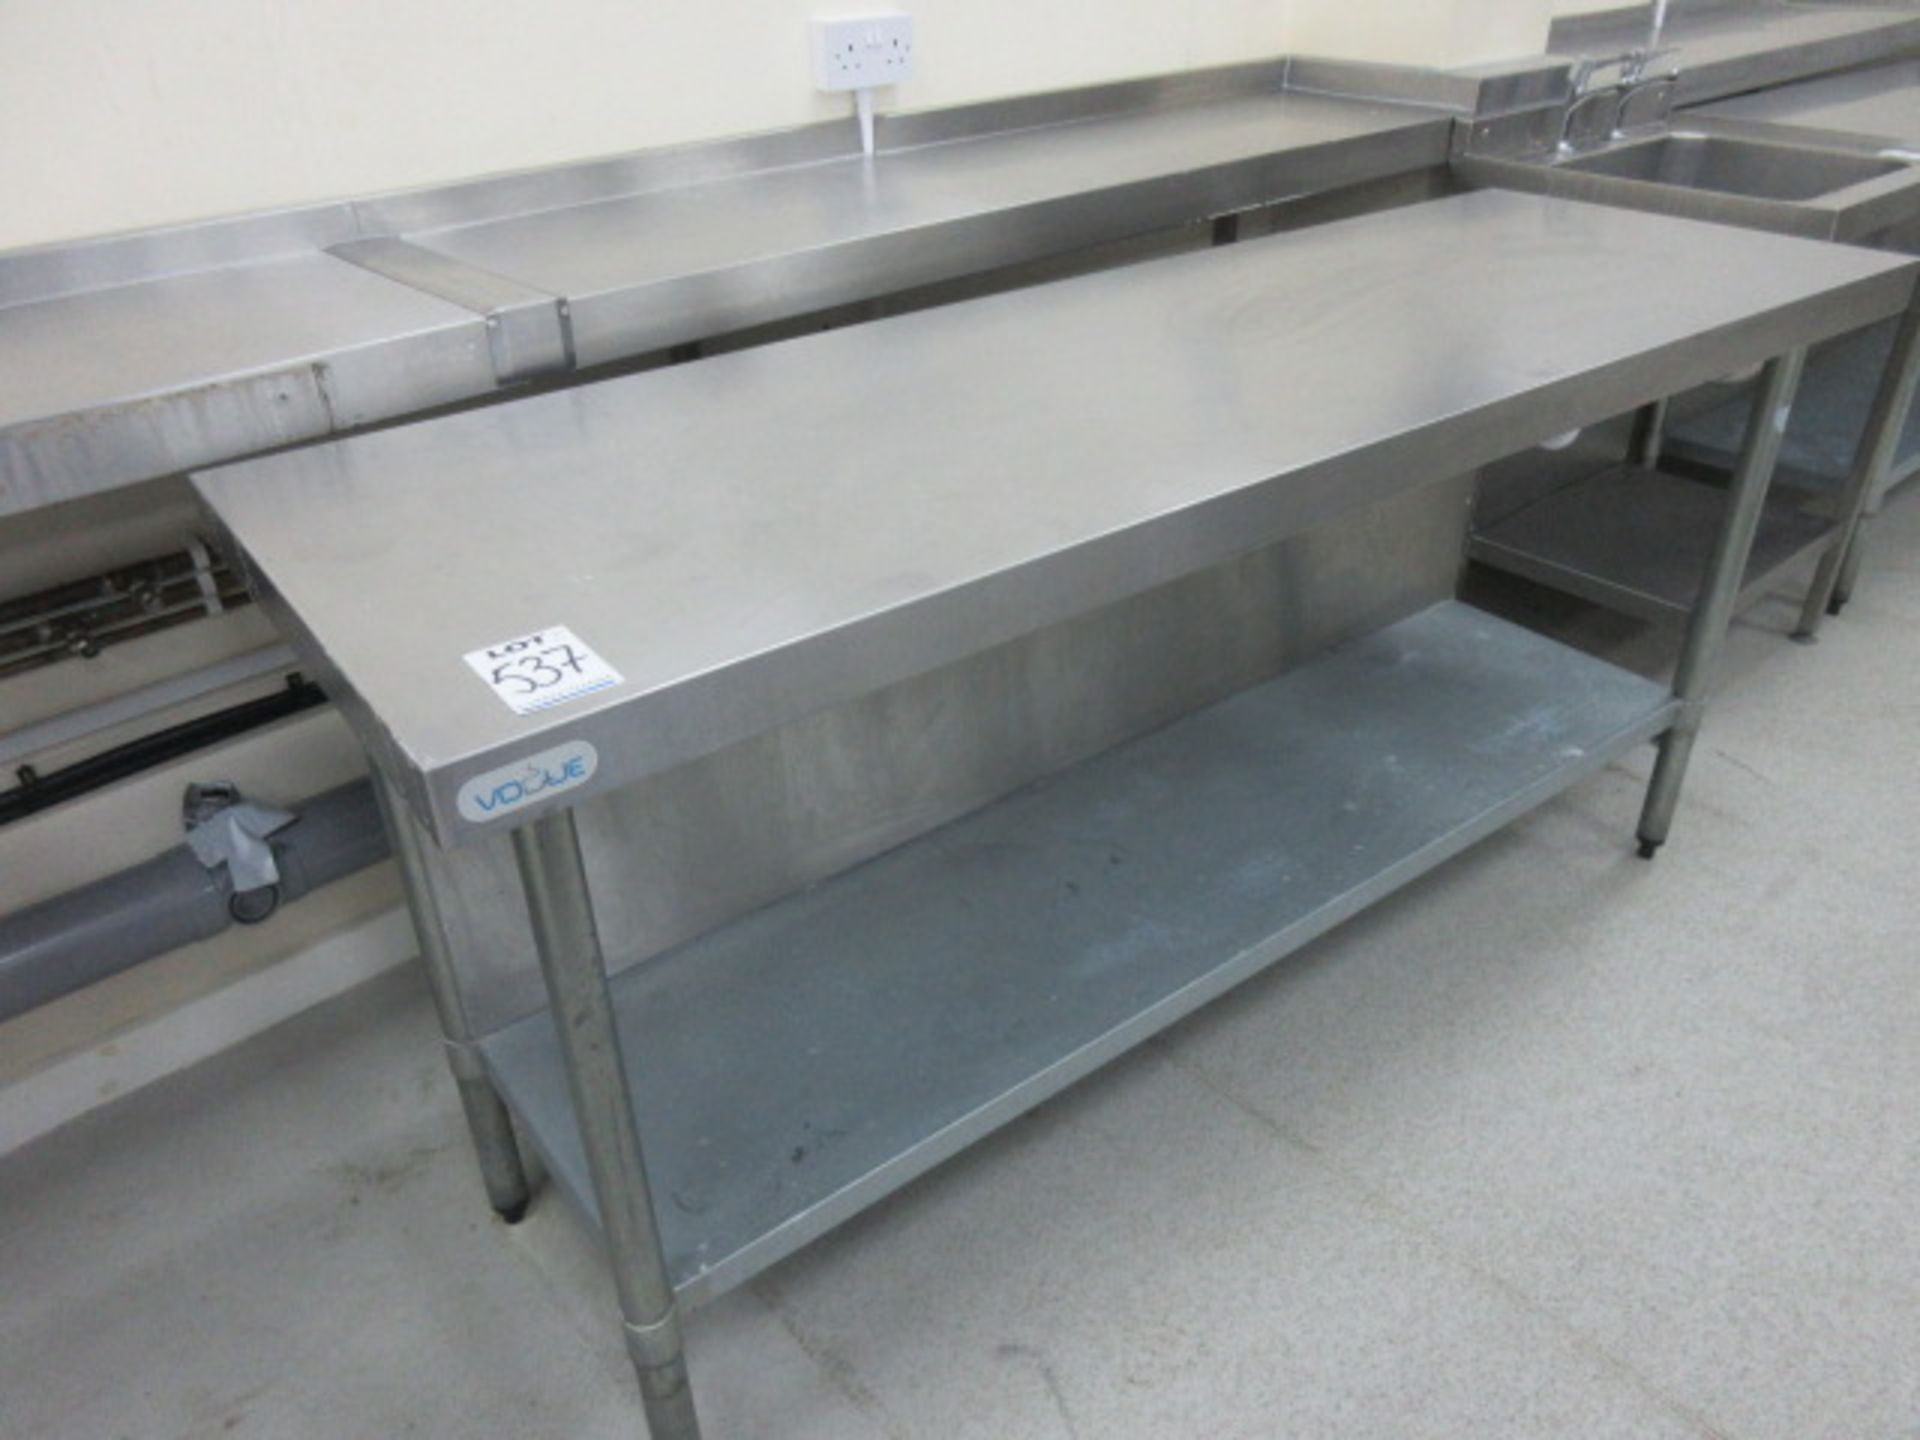 Vogue Stainless Steel Catering Table. Size 1800 mm x 600 mm Holehouse Road Grd Floor Room B3